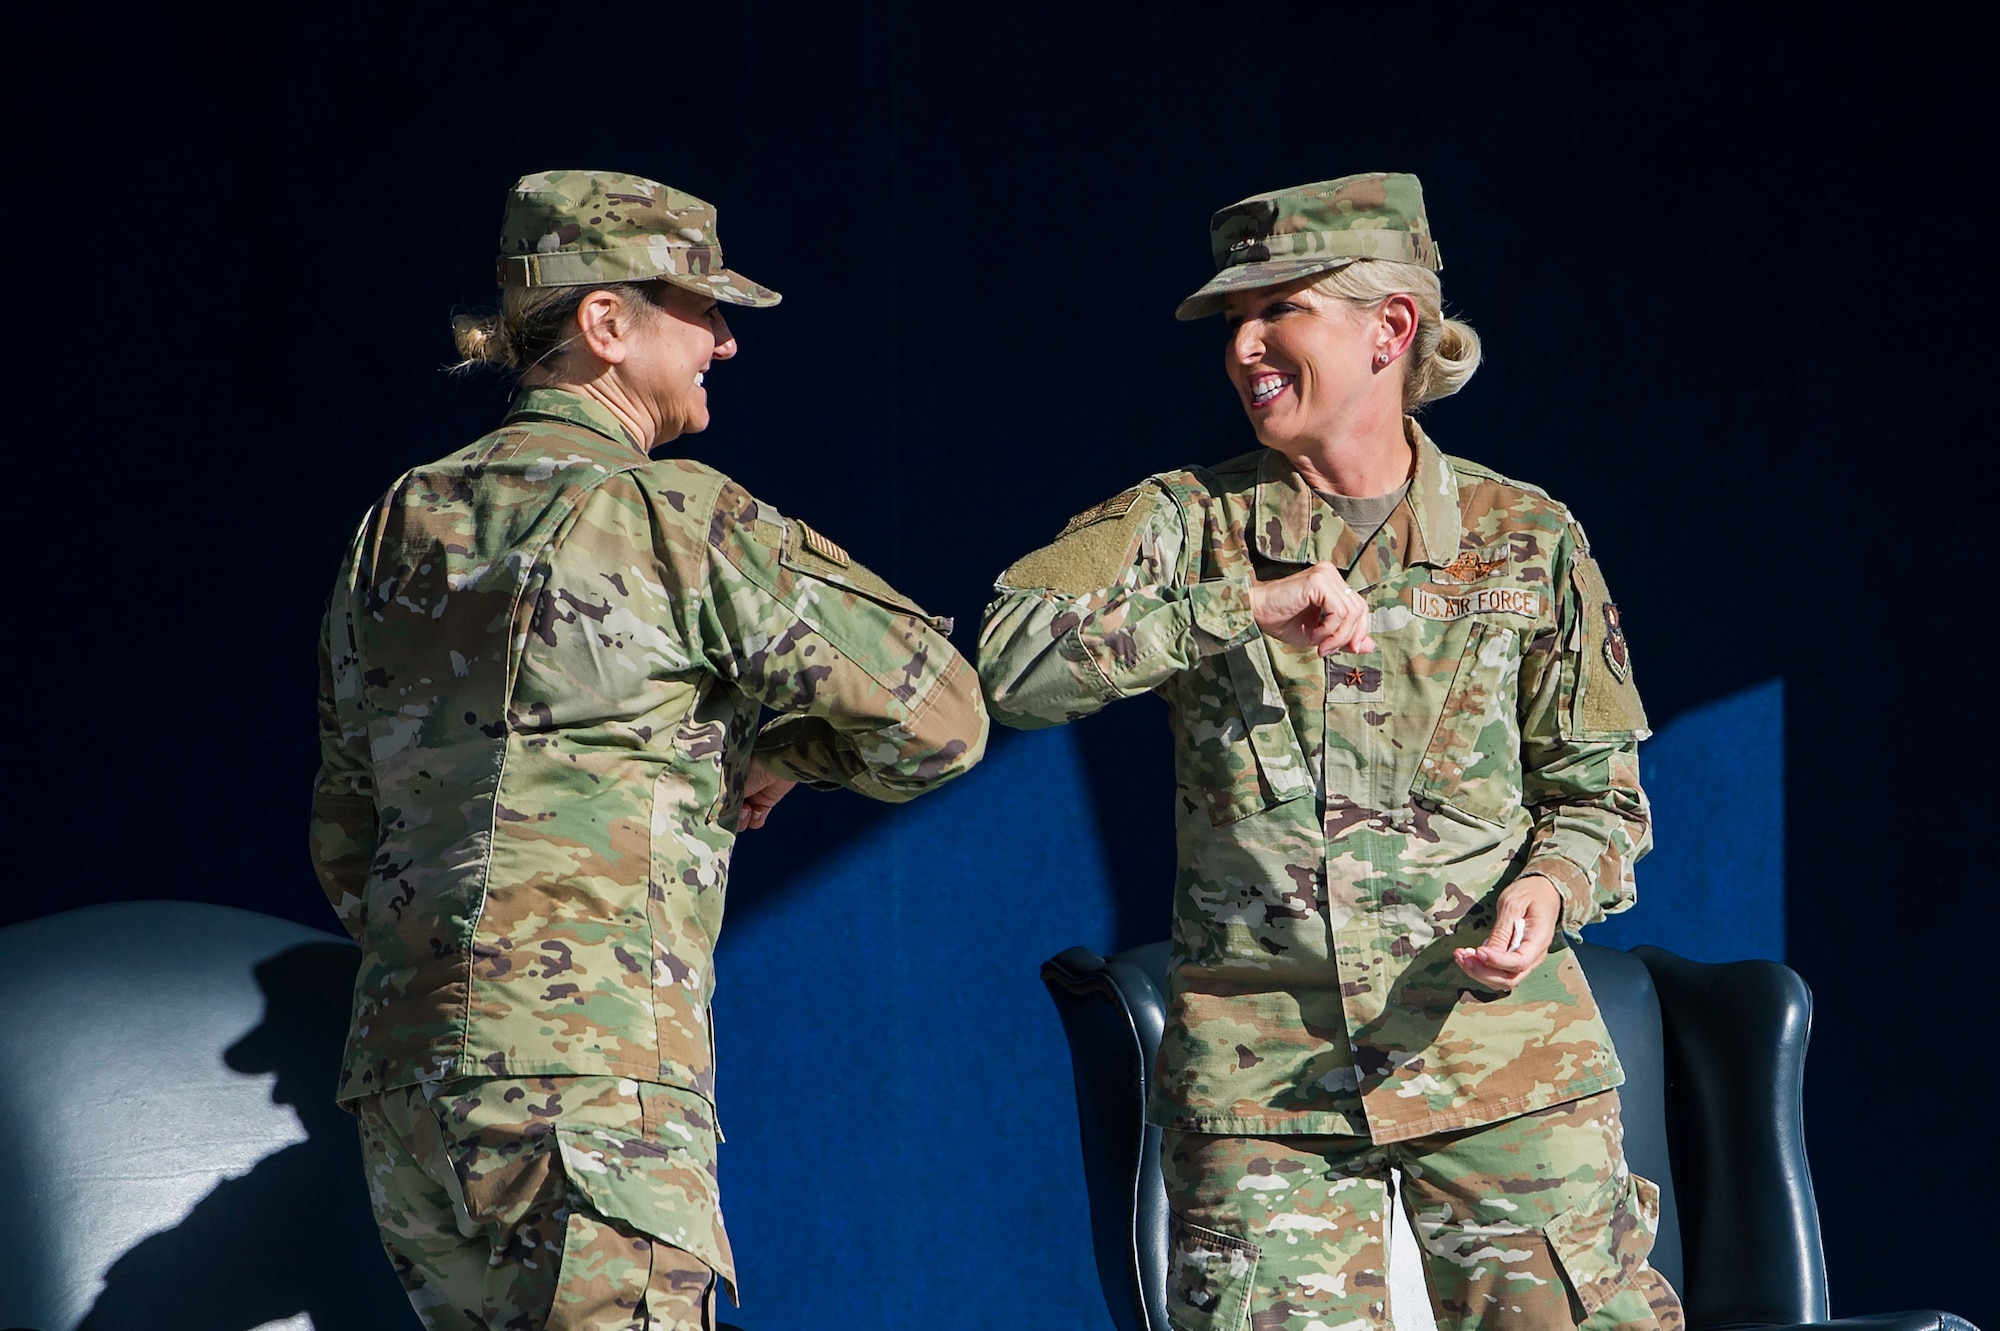 Brig. Gen. Caroline Miller, left, bumps elbows with Brig. Gen. Laura Lenderman during the 502d Air Base Wing and Joint Base San Antonio change of command ceremony June 12 at JBSA-Fort Sam Houston, Texas. Command of the unit passed from Lenderman to Miller during the ceremony.